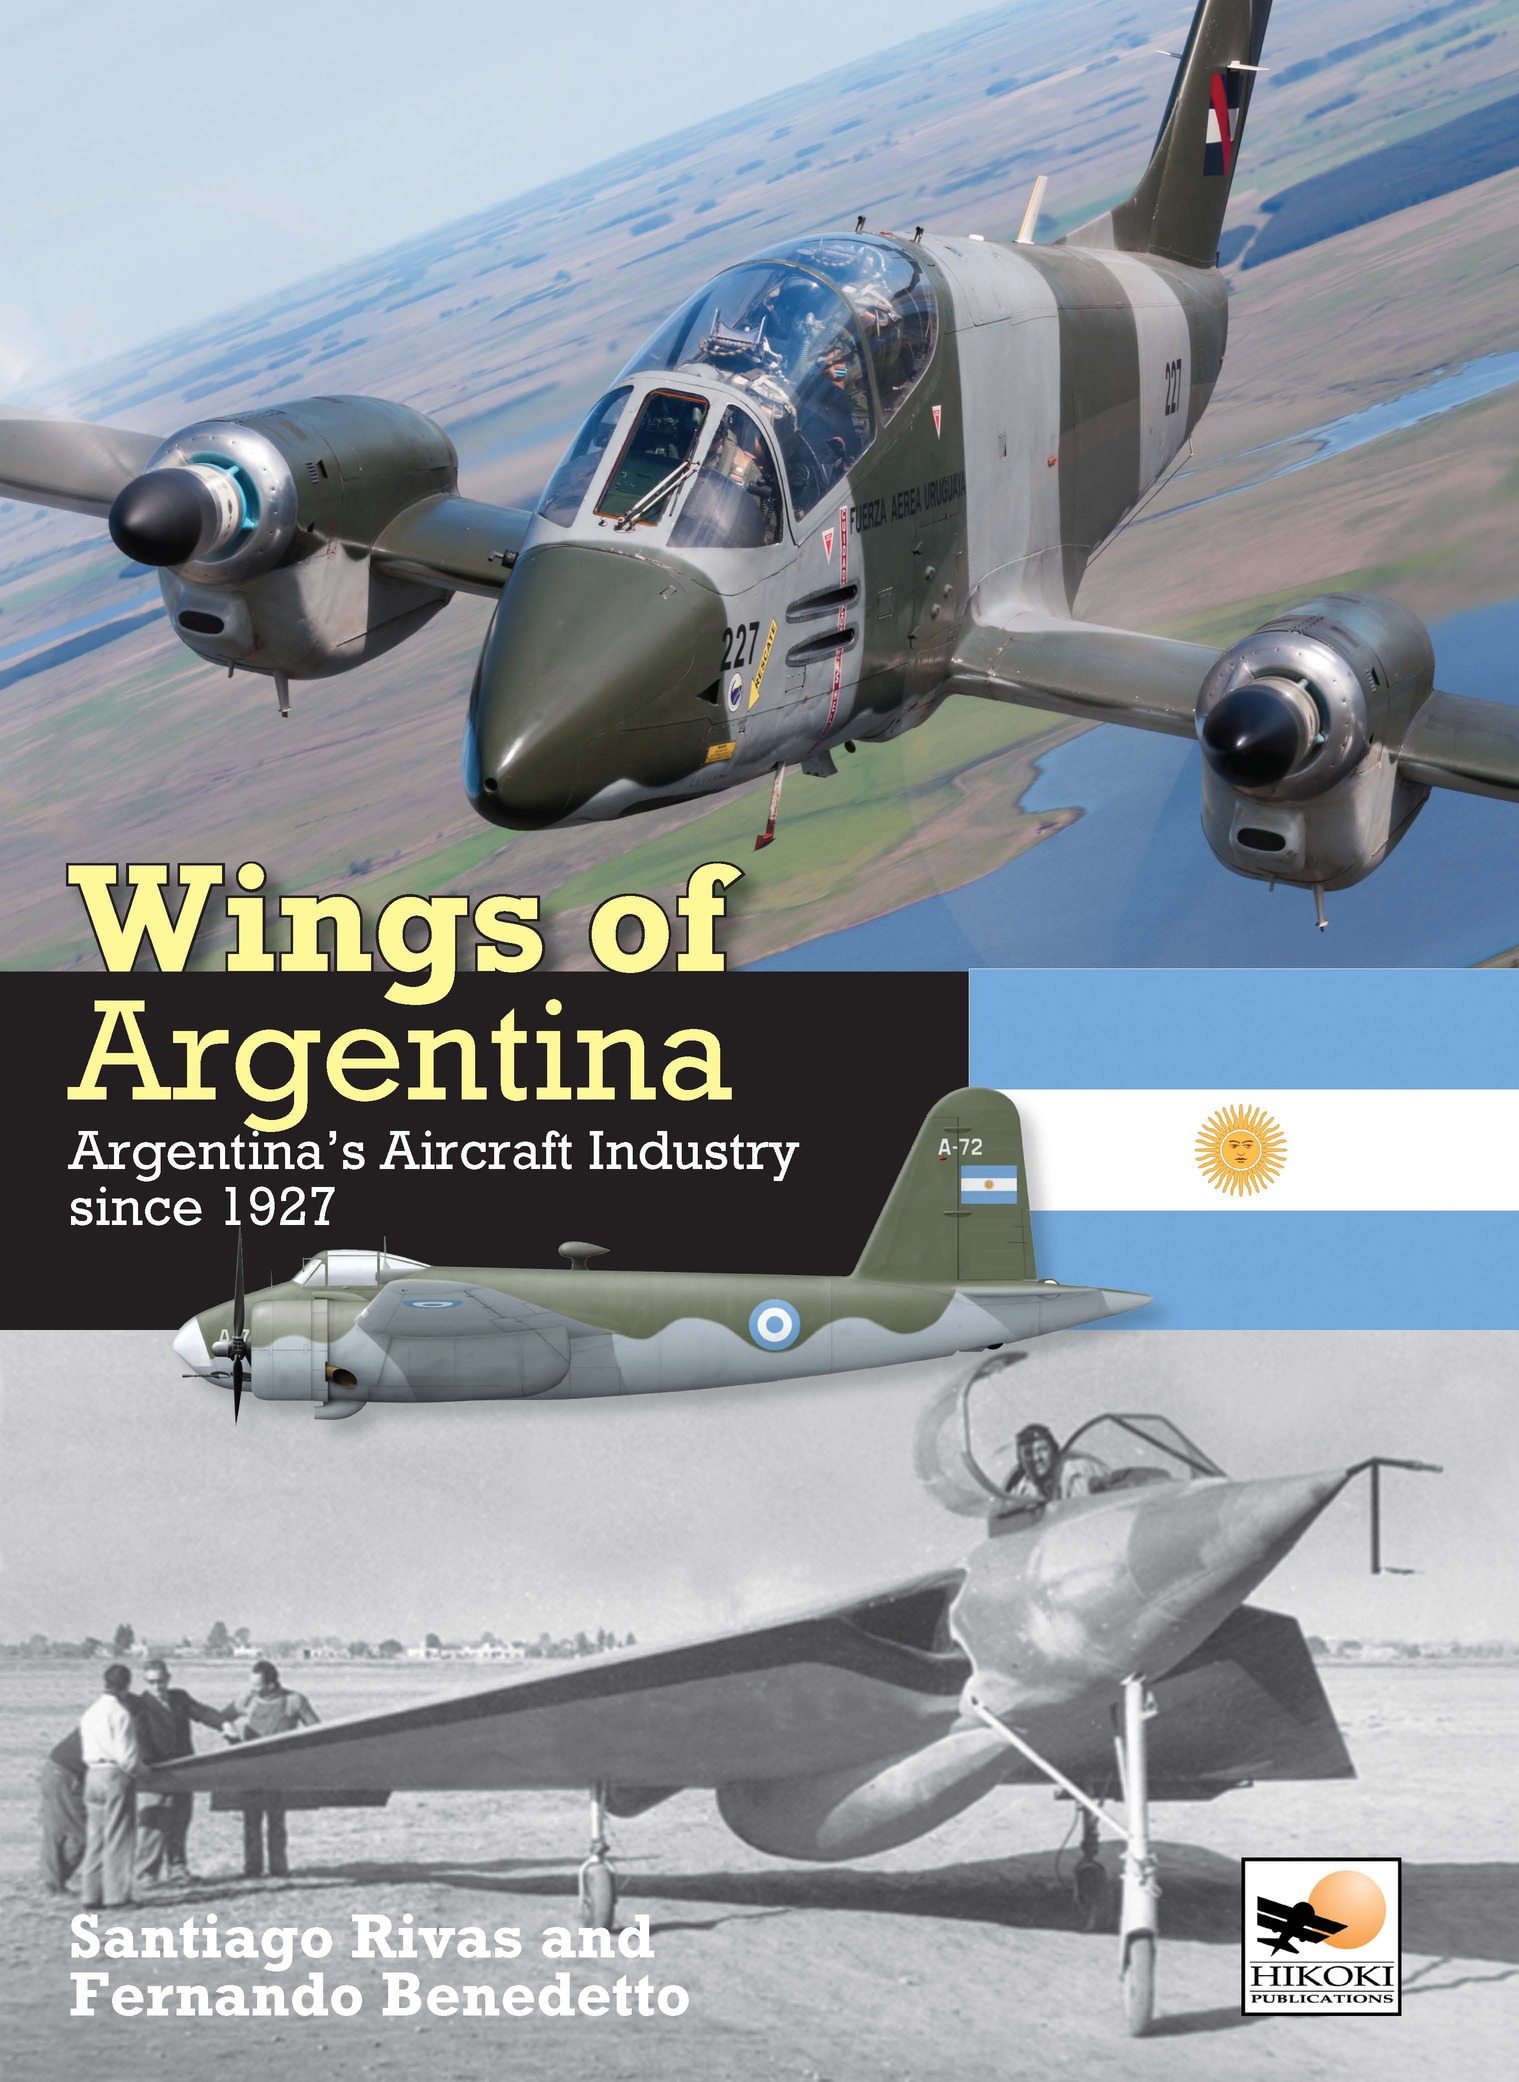 ArgentineAviationFatory-cover_50.jpg